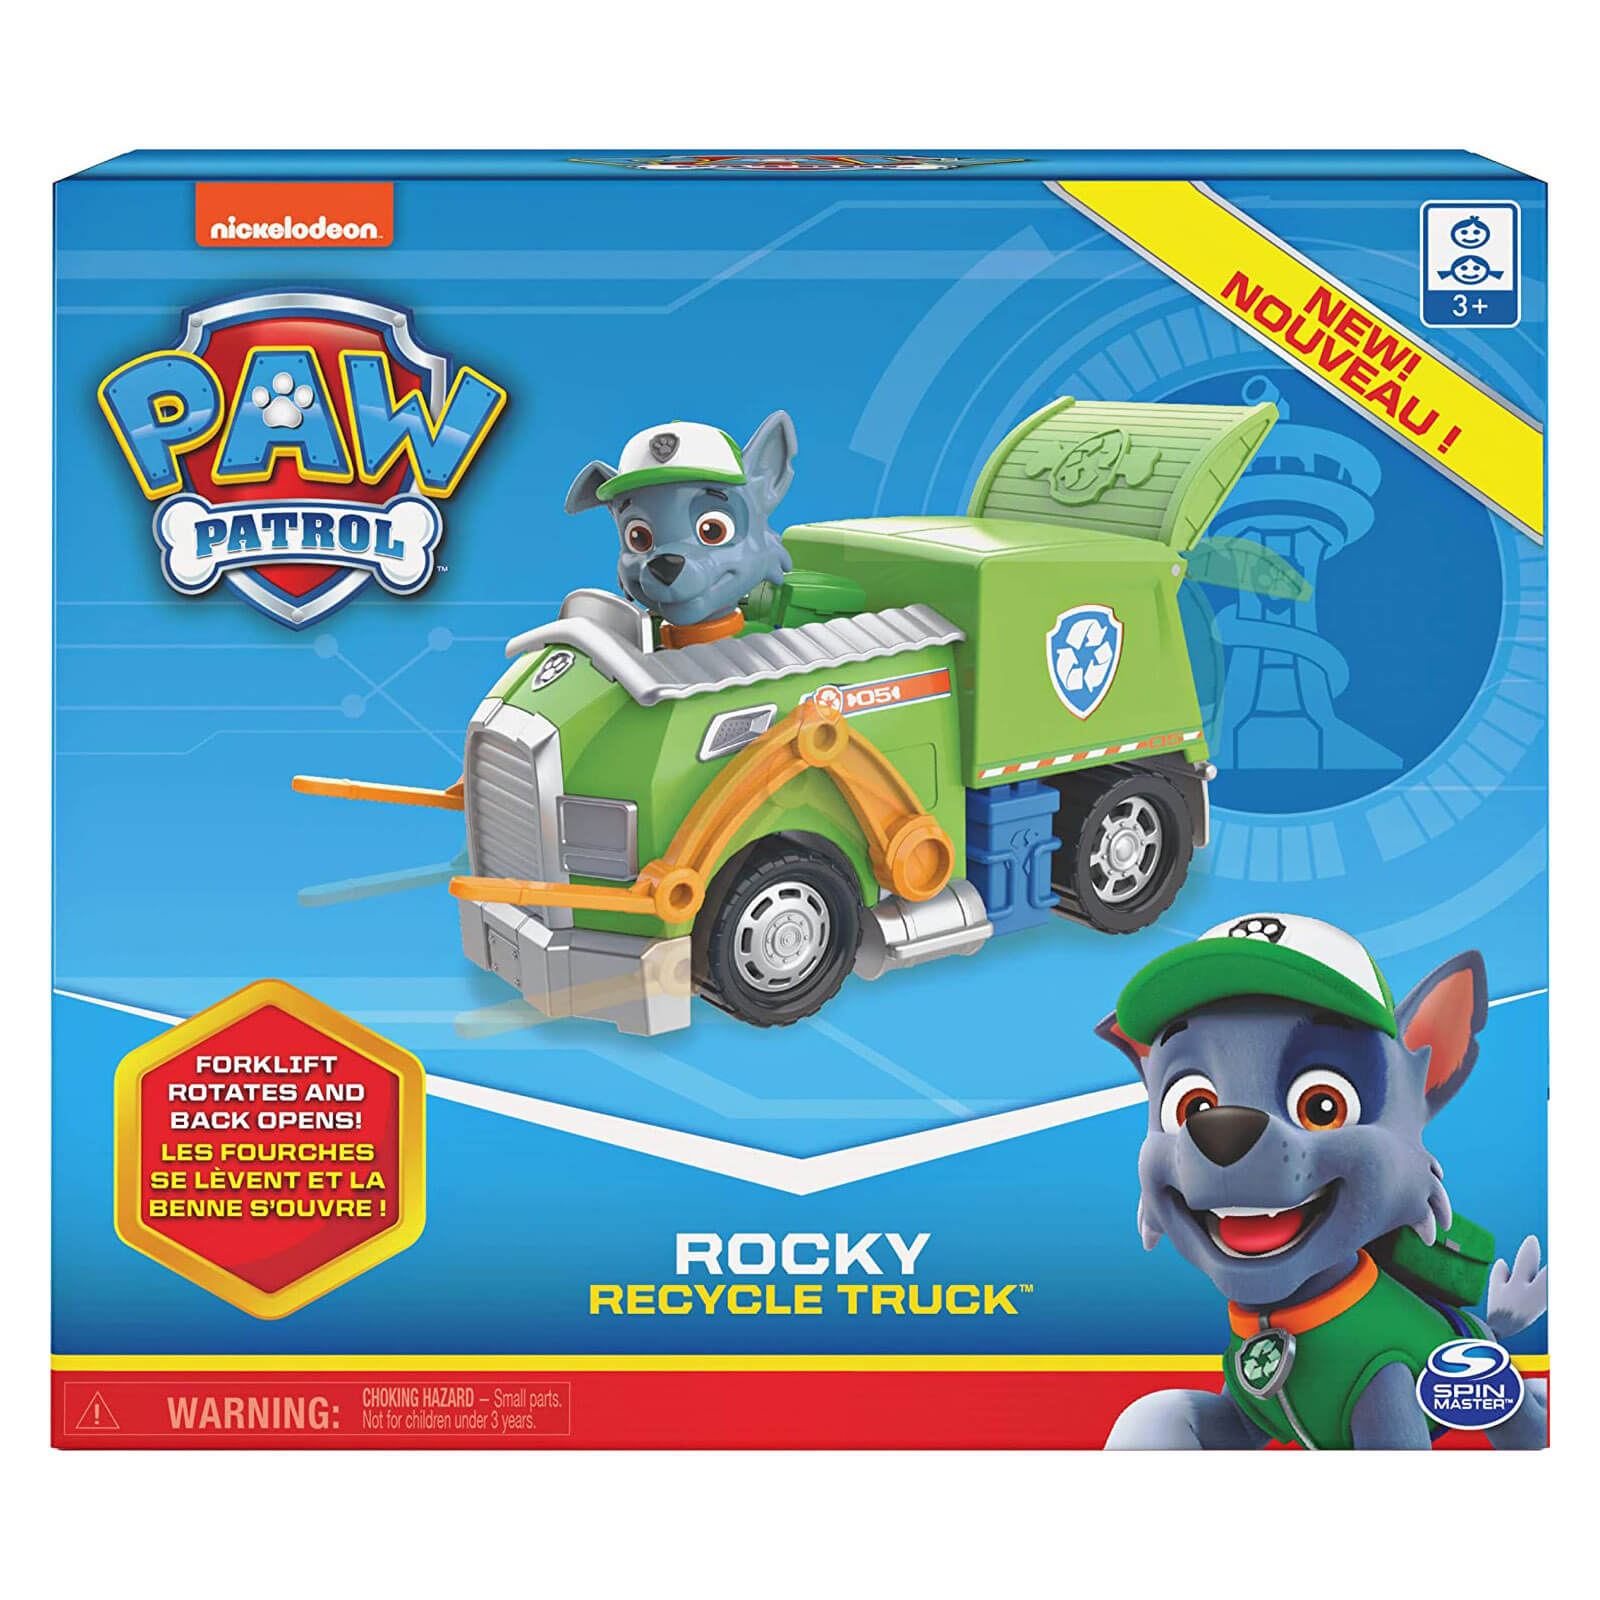 PAW Patrol Rocky’s Recycle Truck Vehicle with Collectible Figure